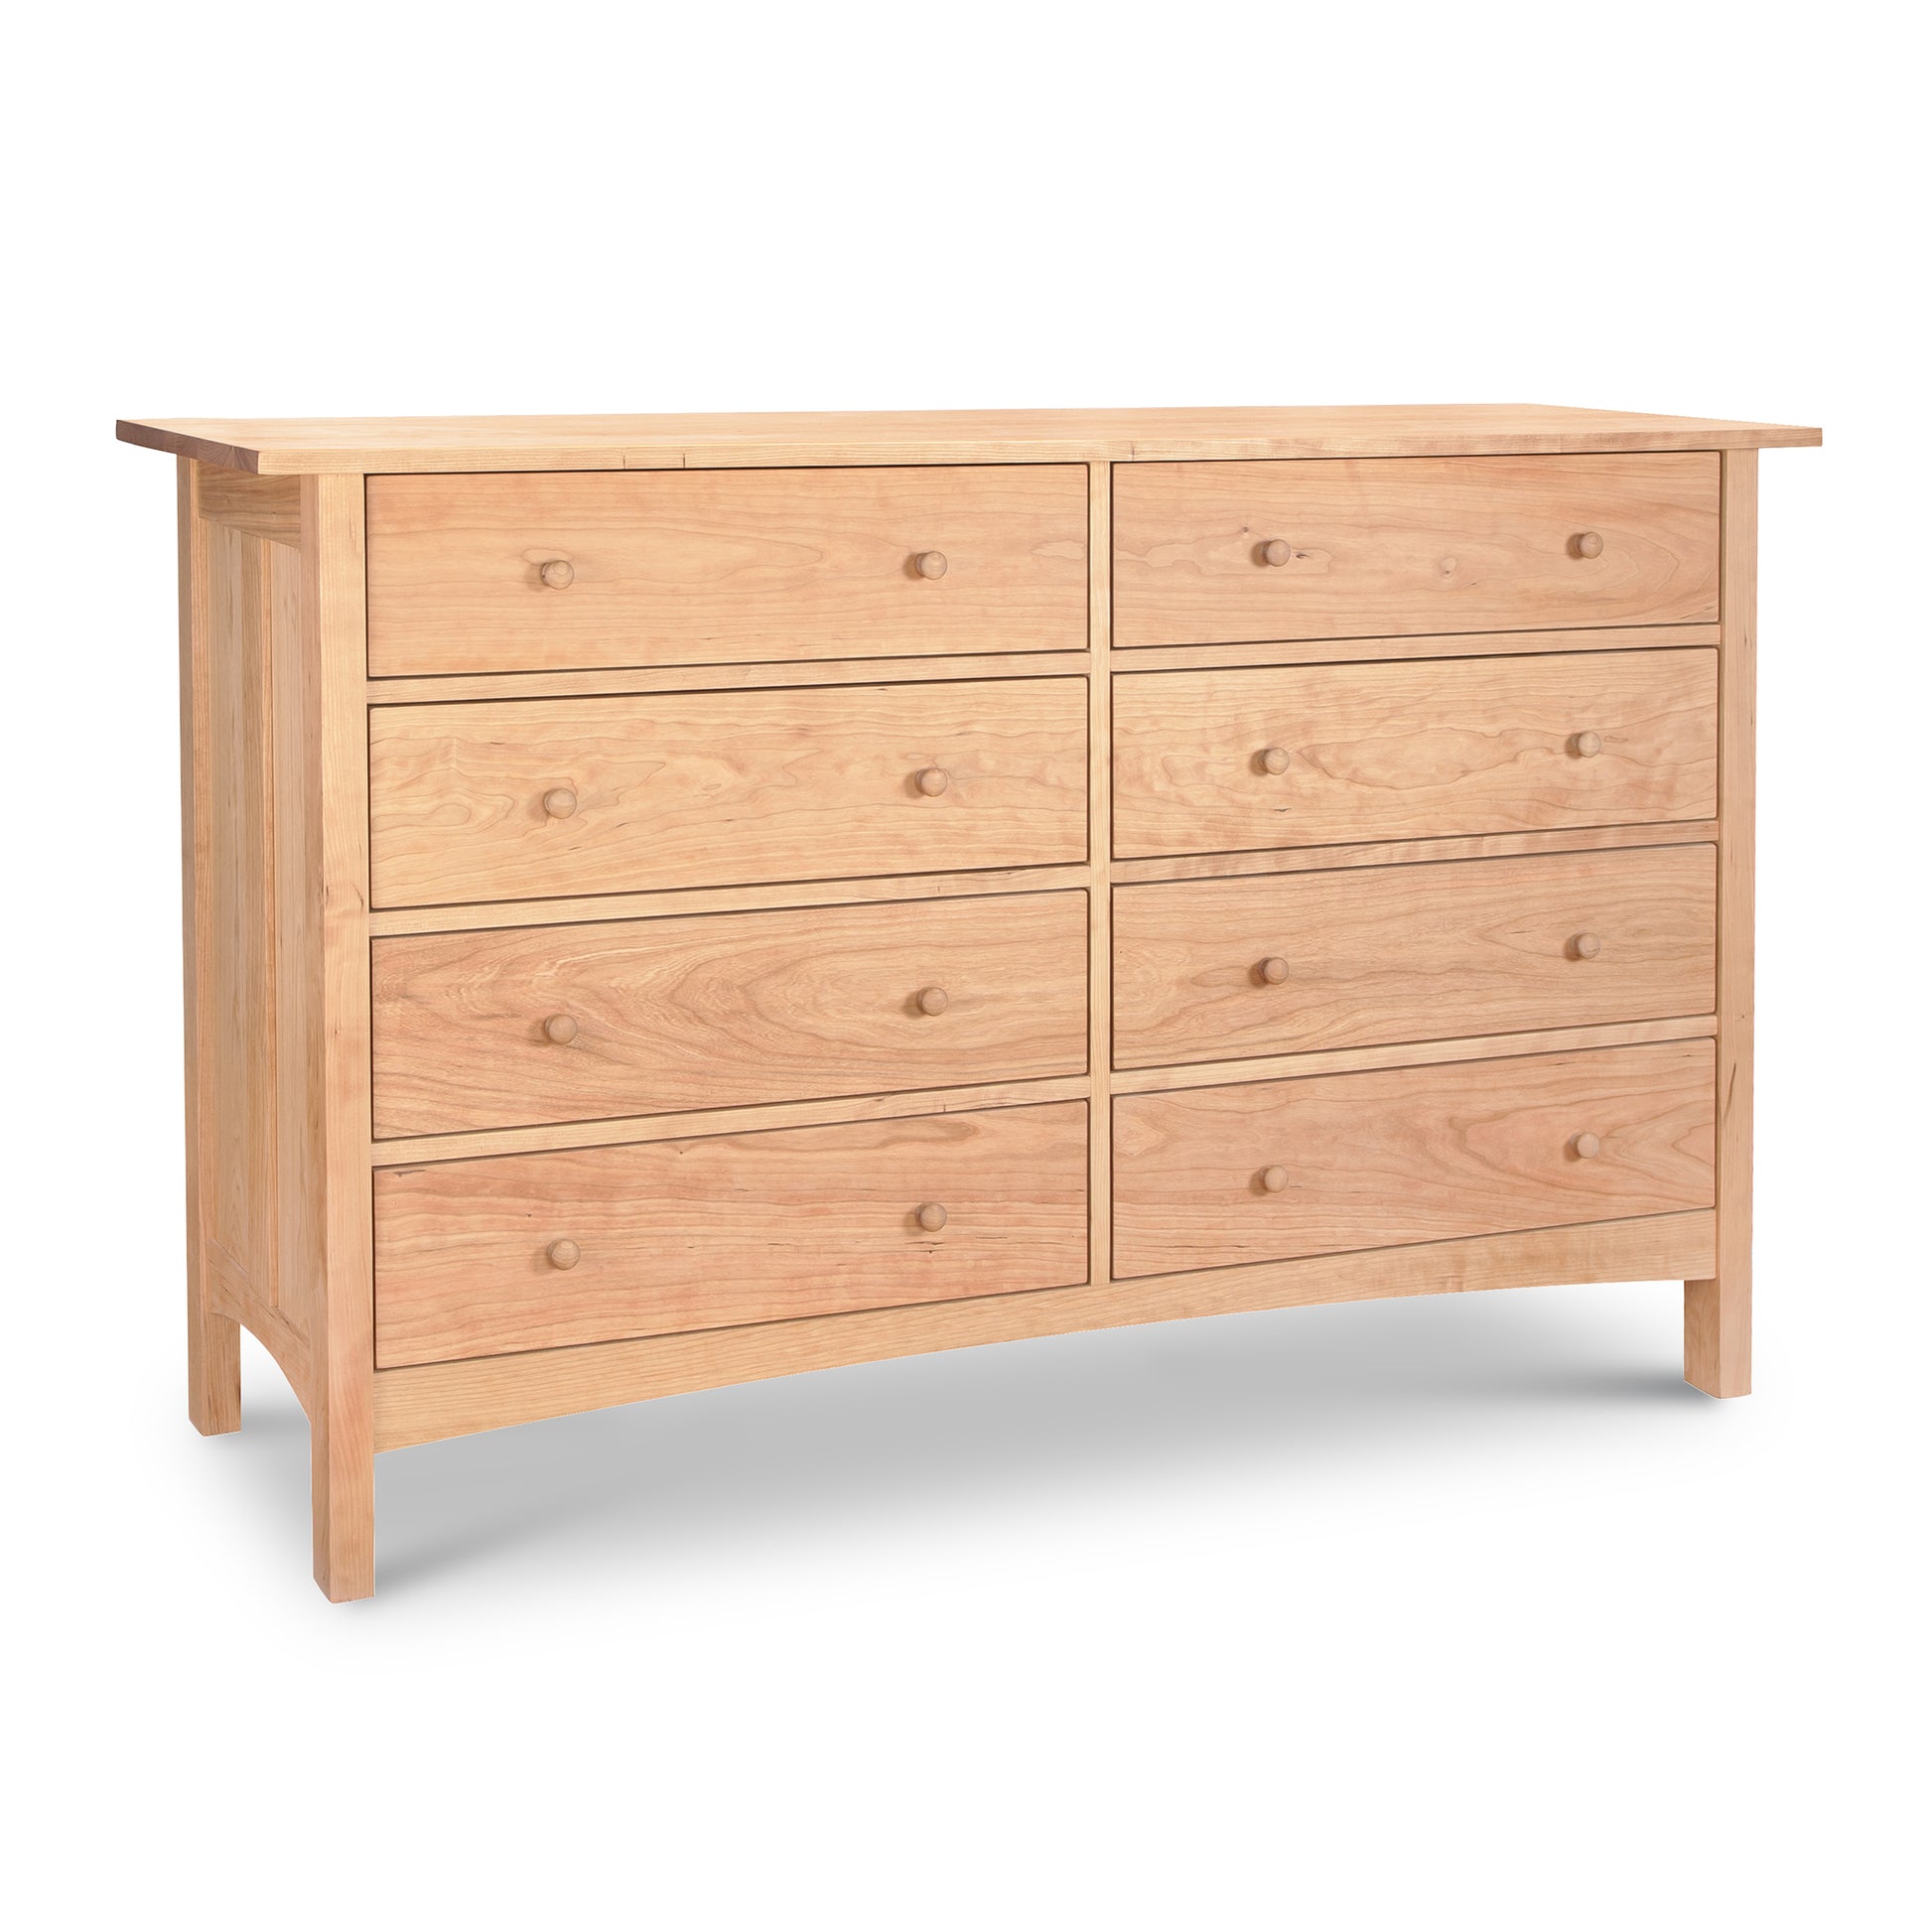 Burlington Shaker 8-Drawer Dresser #1 by Vermont Furniture Designs, isolated on a white background.